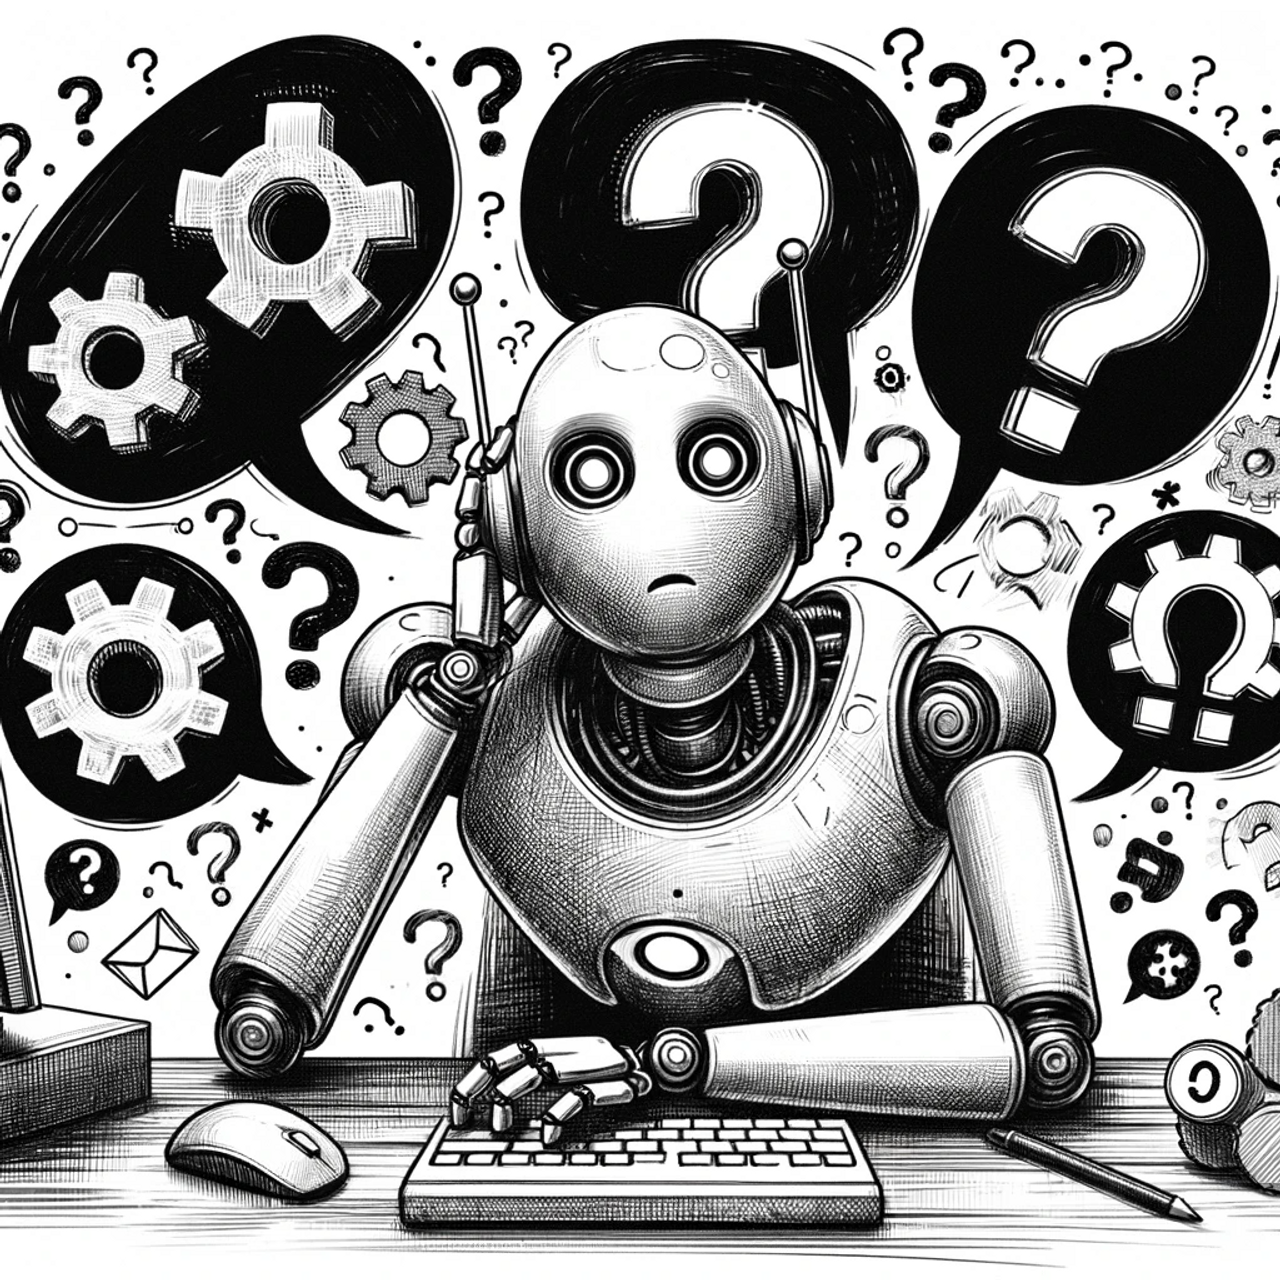 DALL·E 2023-12-11 10.14.44 - A sketch-style illustration representing the challenges of chatbots. The image shows a humanoid robot sitting at a desk, looking puzzled while staring.png